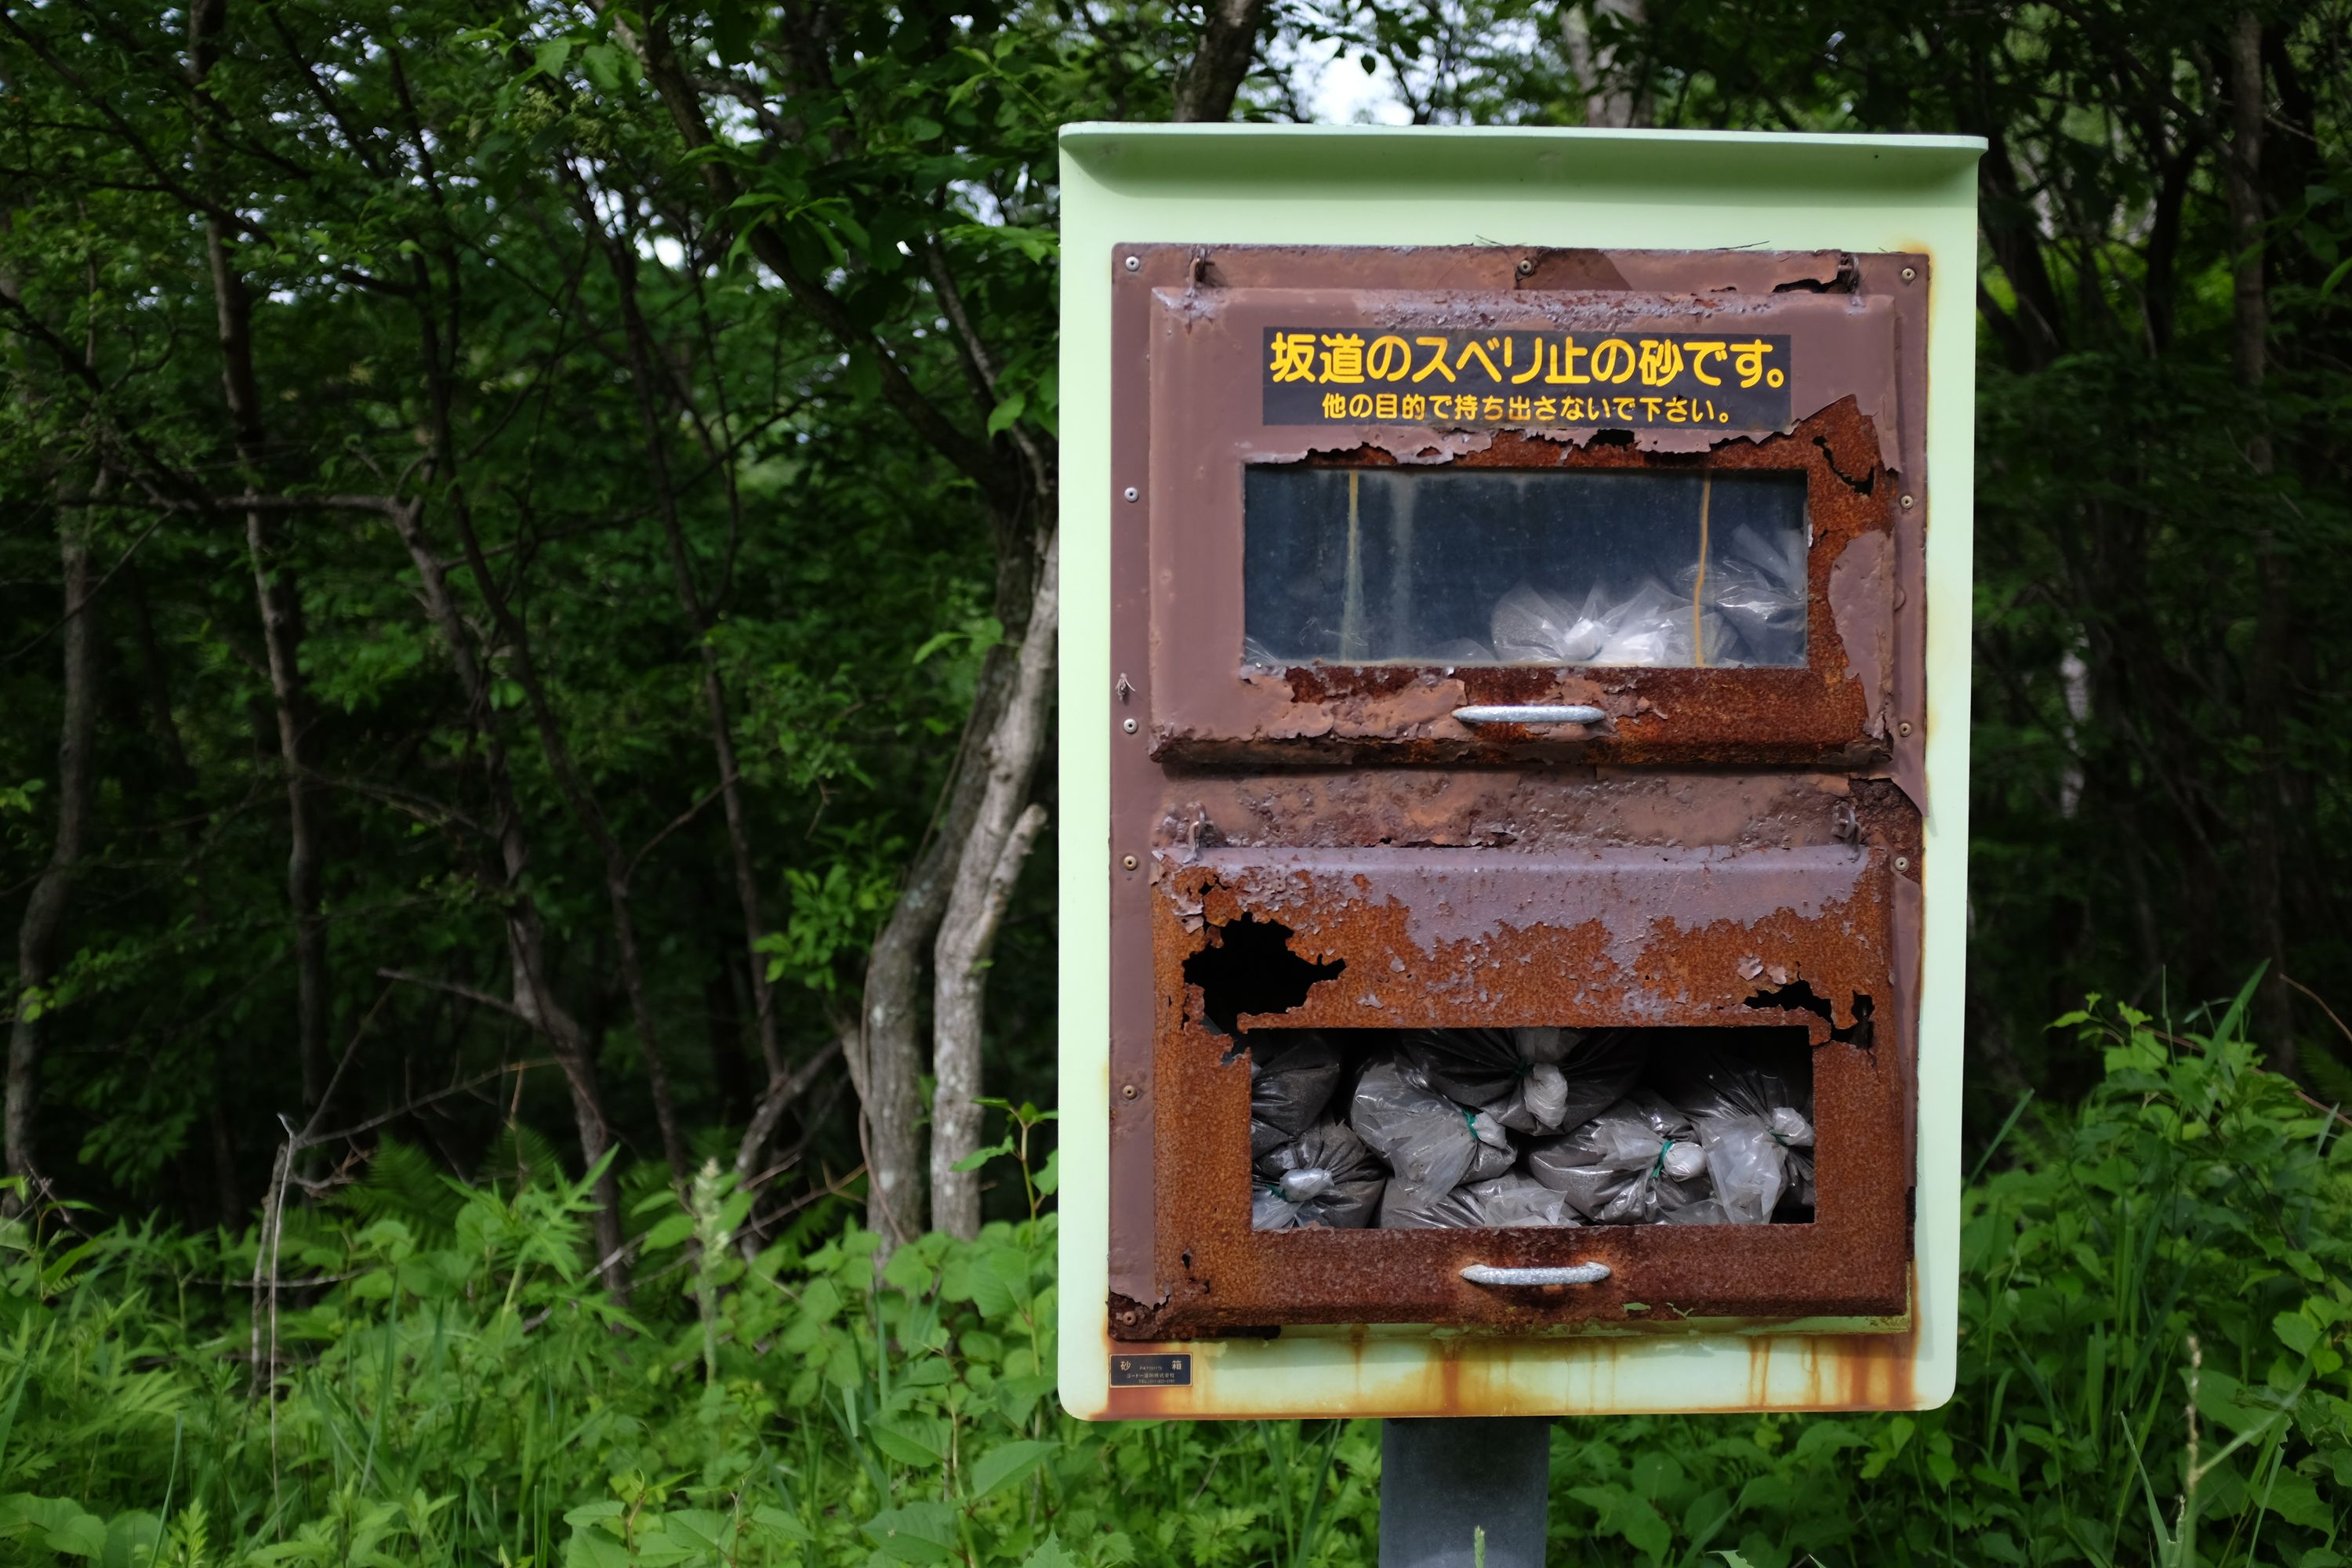 A rusty cabinet in the forest with bags of volcanic ash.